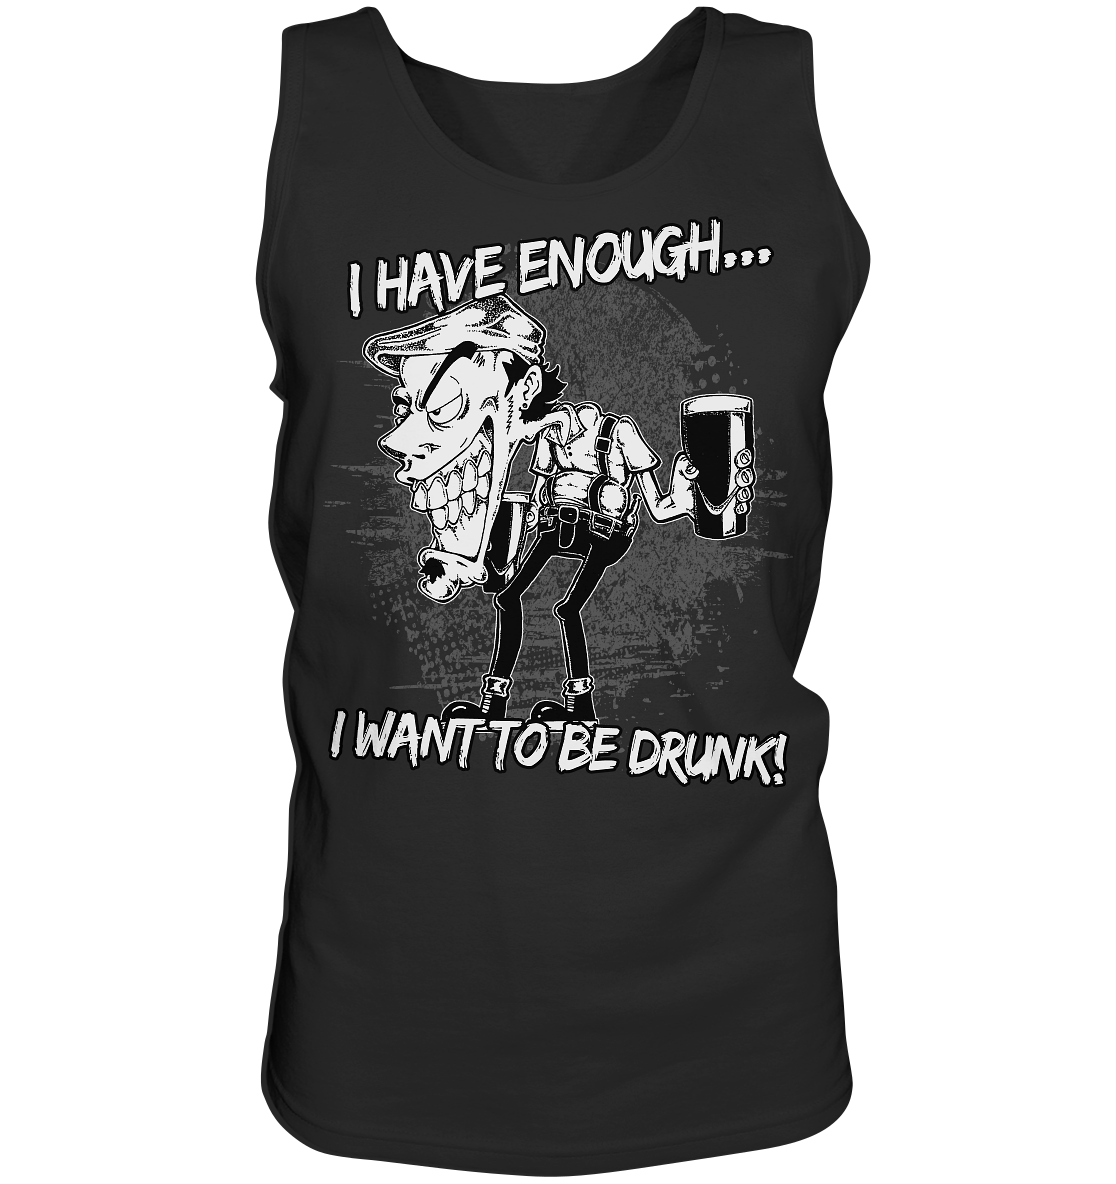 I Have Enough... "I Want To Be Drunk!" - Tank-Top